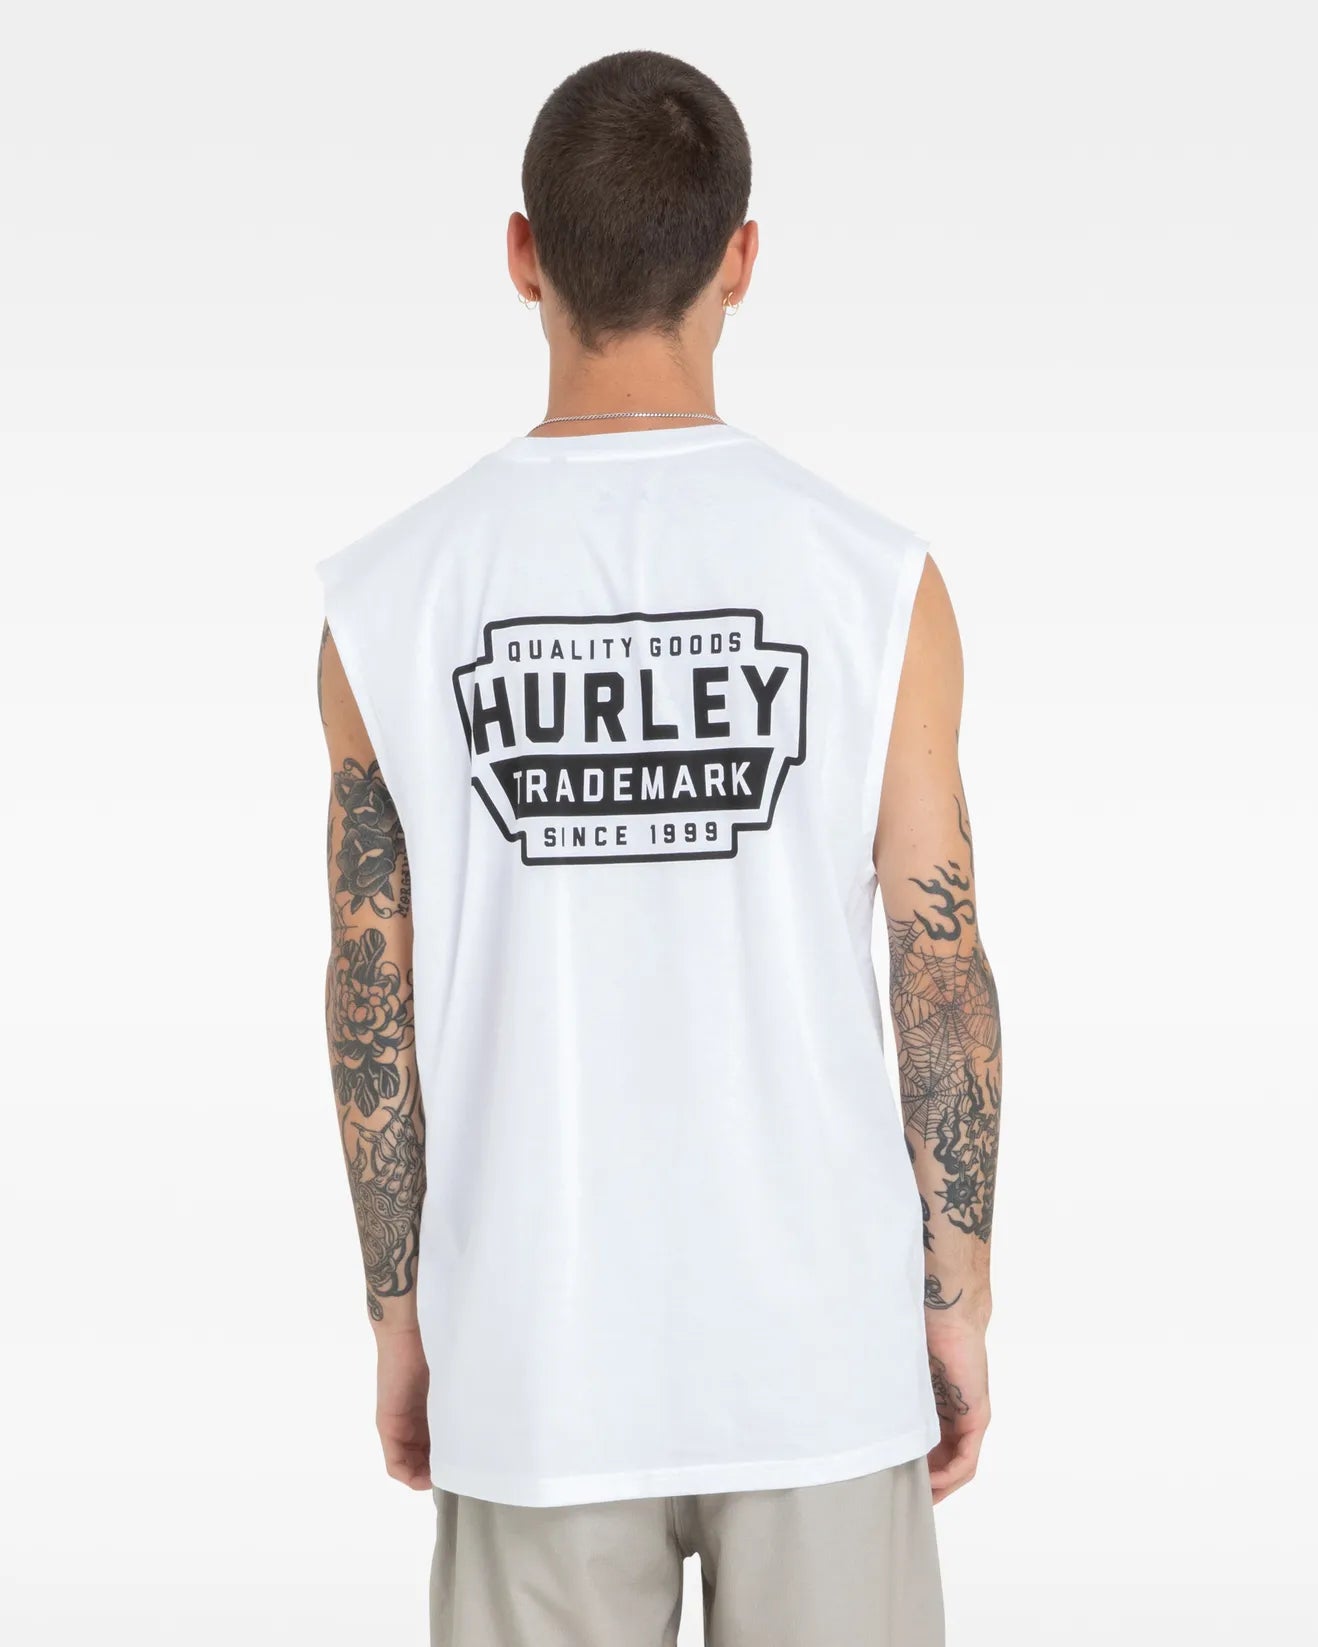 Hurley Station Muscle - White